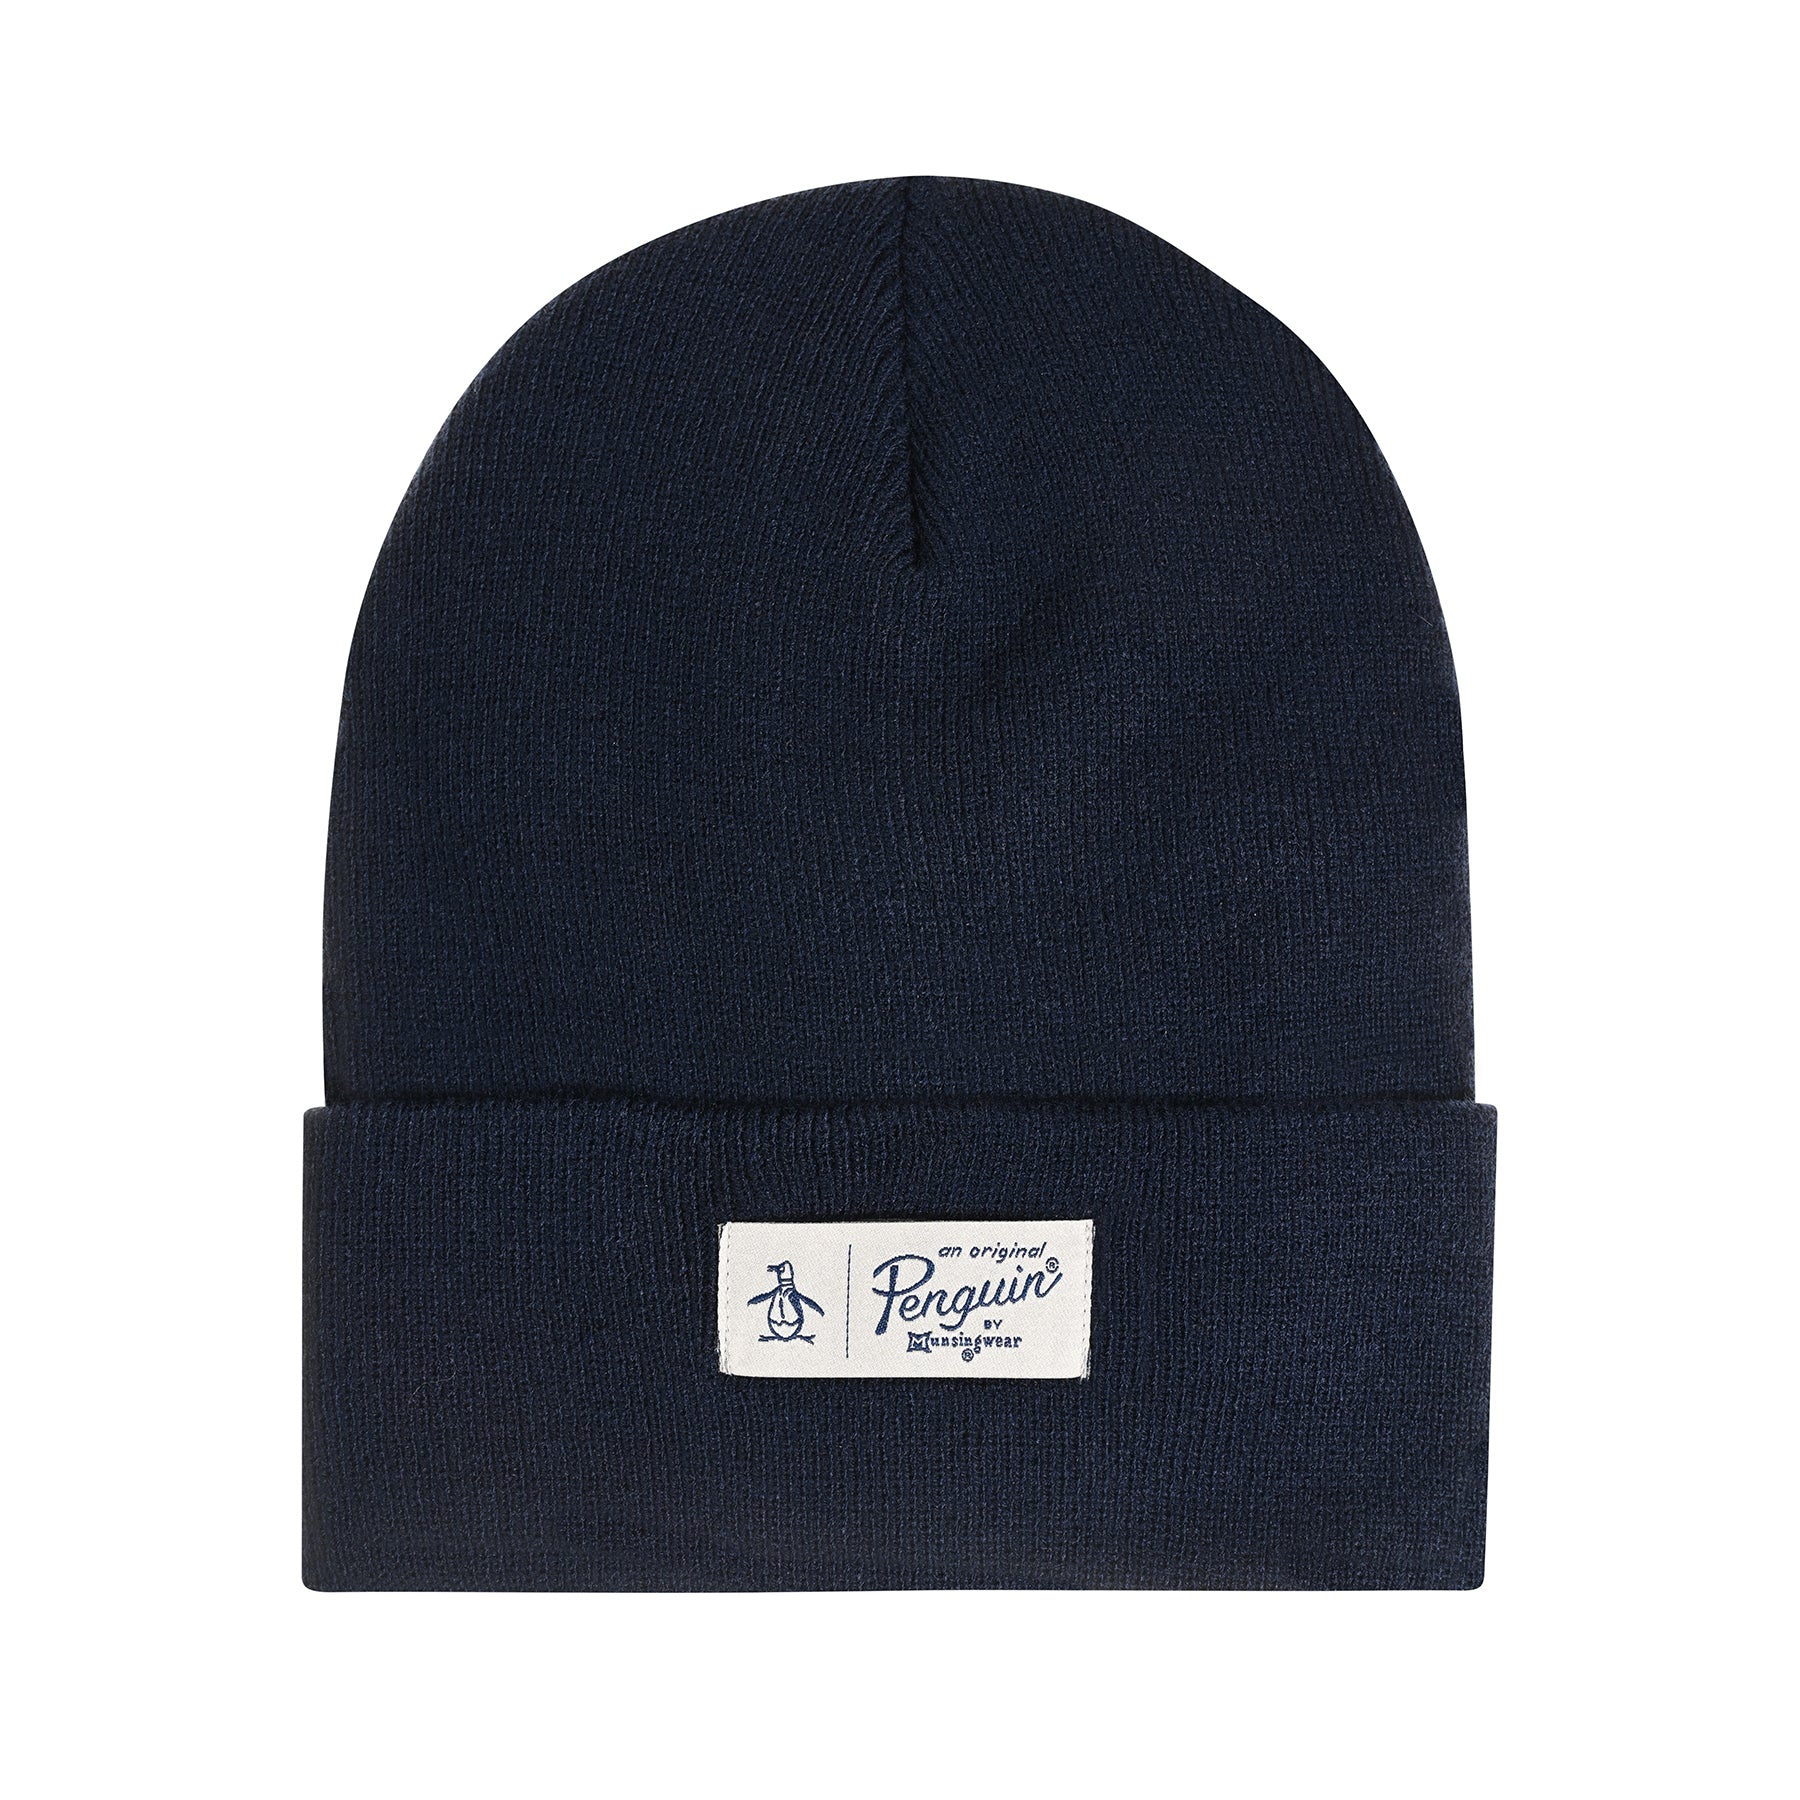 View Phillip Classic Beanie In Navy information